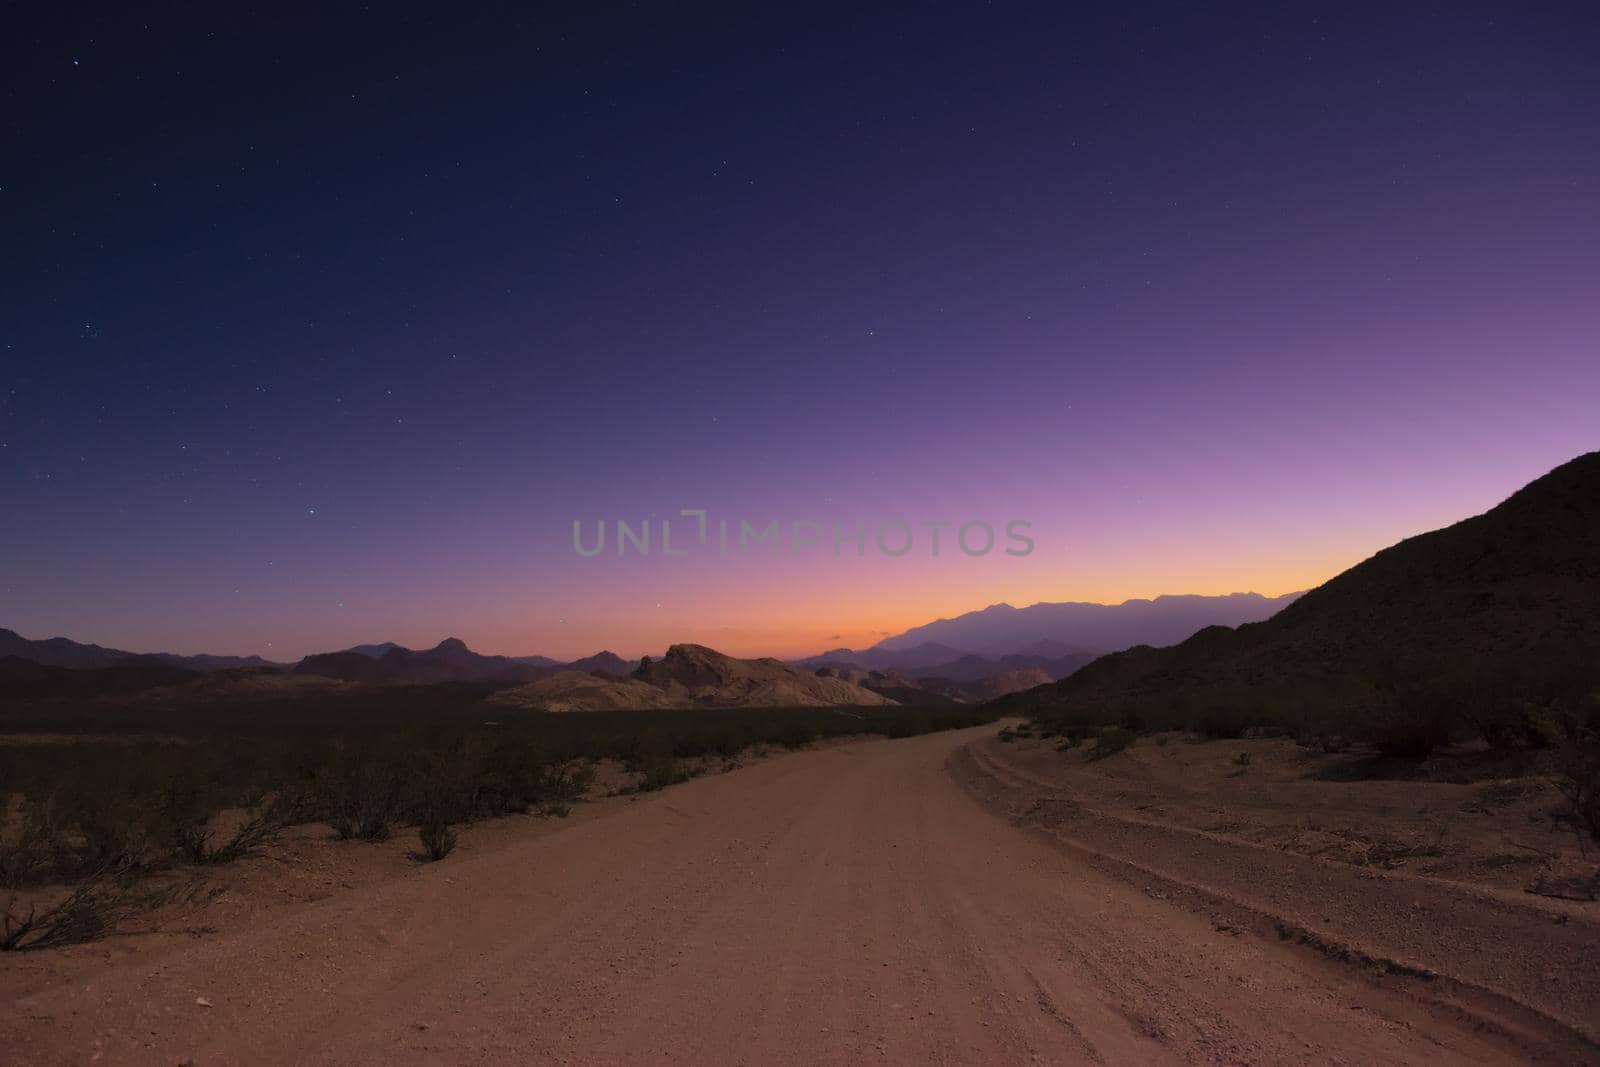 Dirt road into the unknown under a starry twilight sky. by hernan_hyper